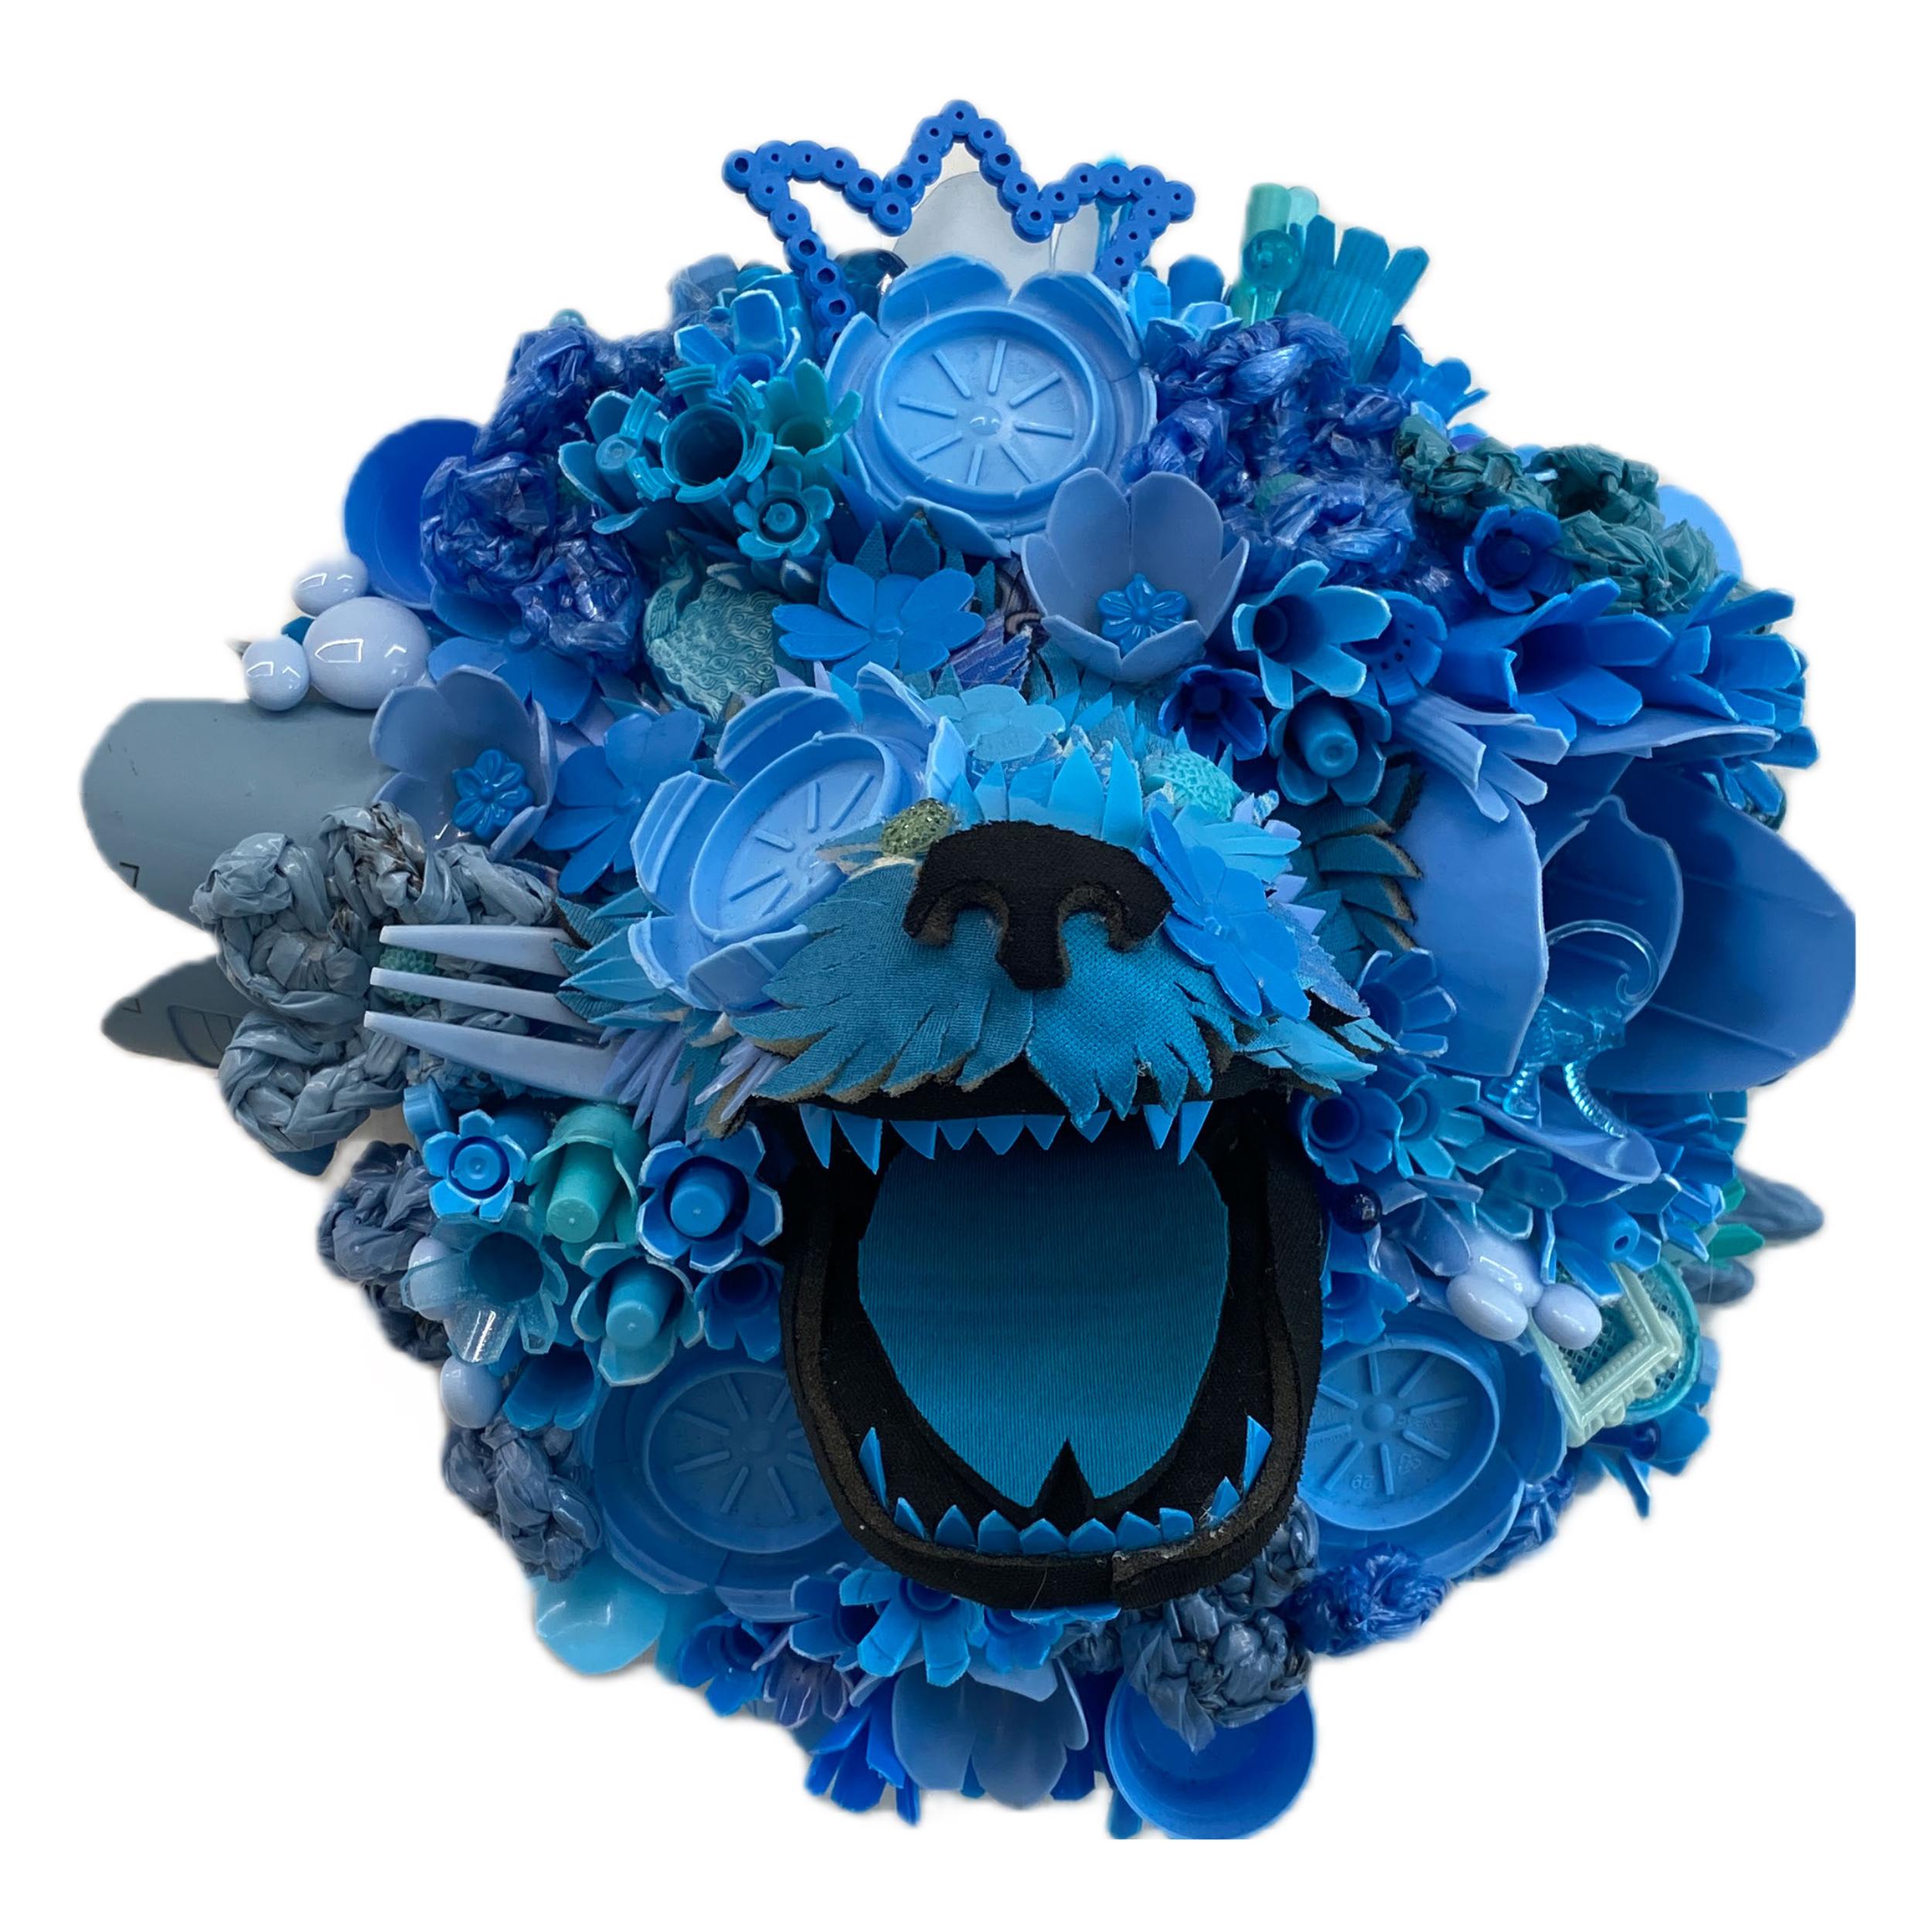 Hydrangea Hound, Cyan, Contemporary Animal Sculpture, Recycled Materials 